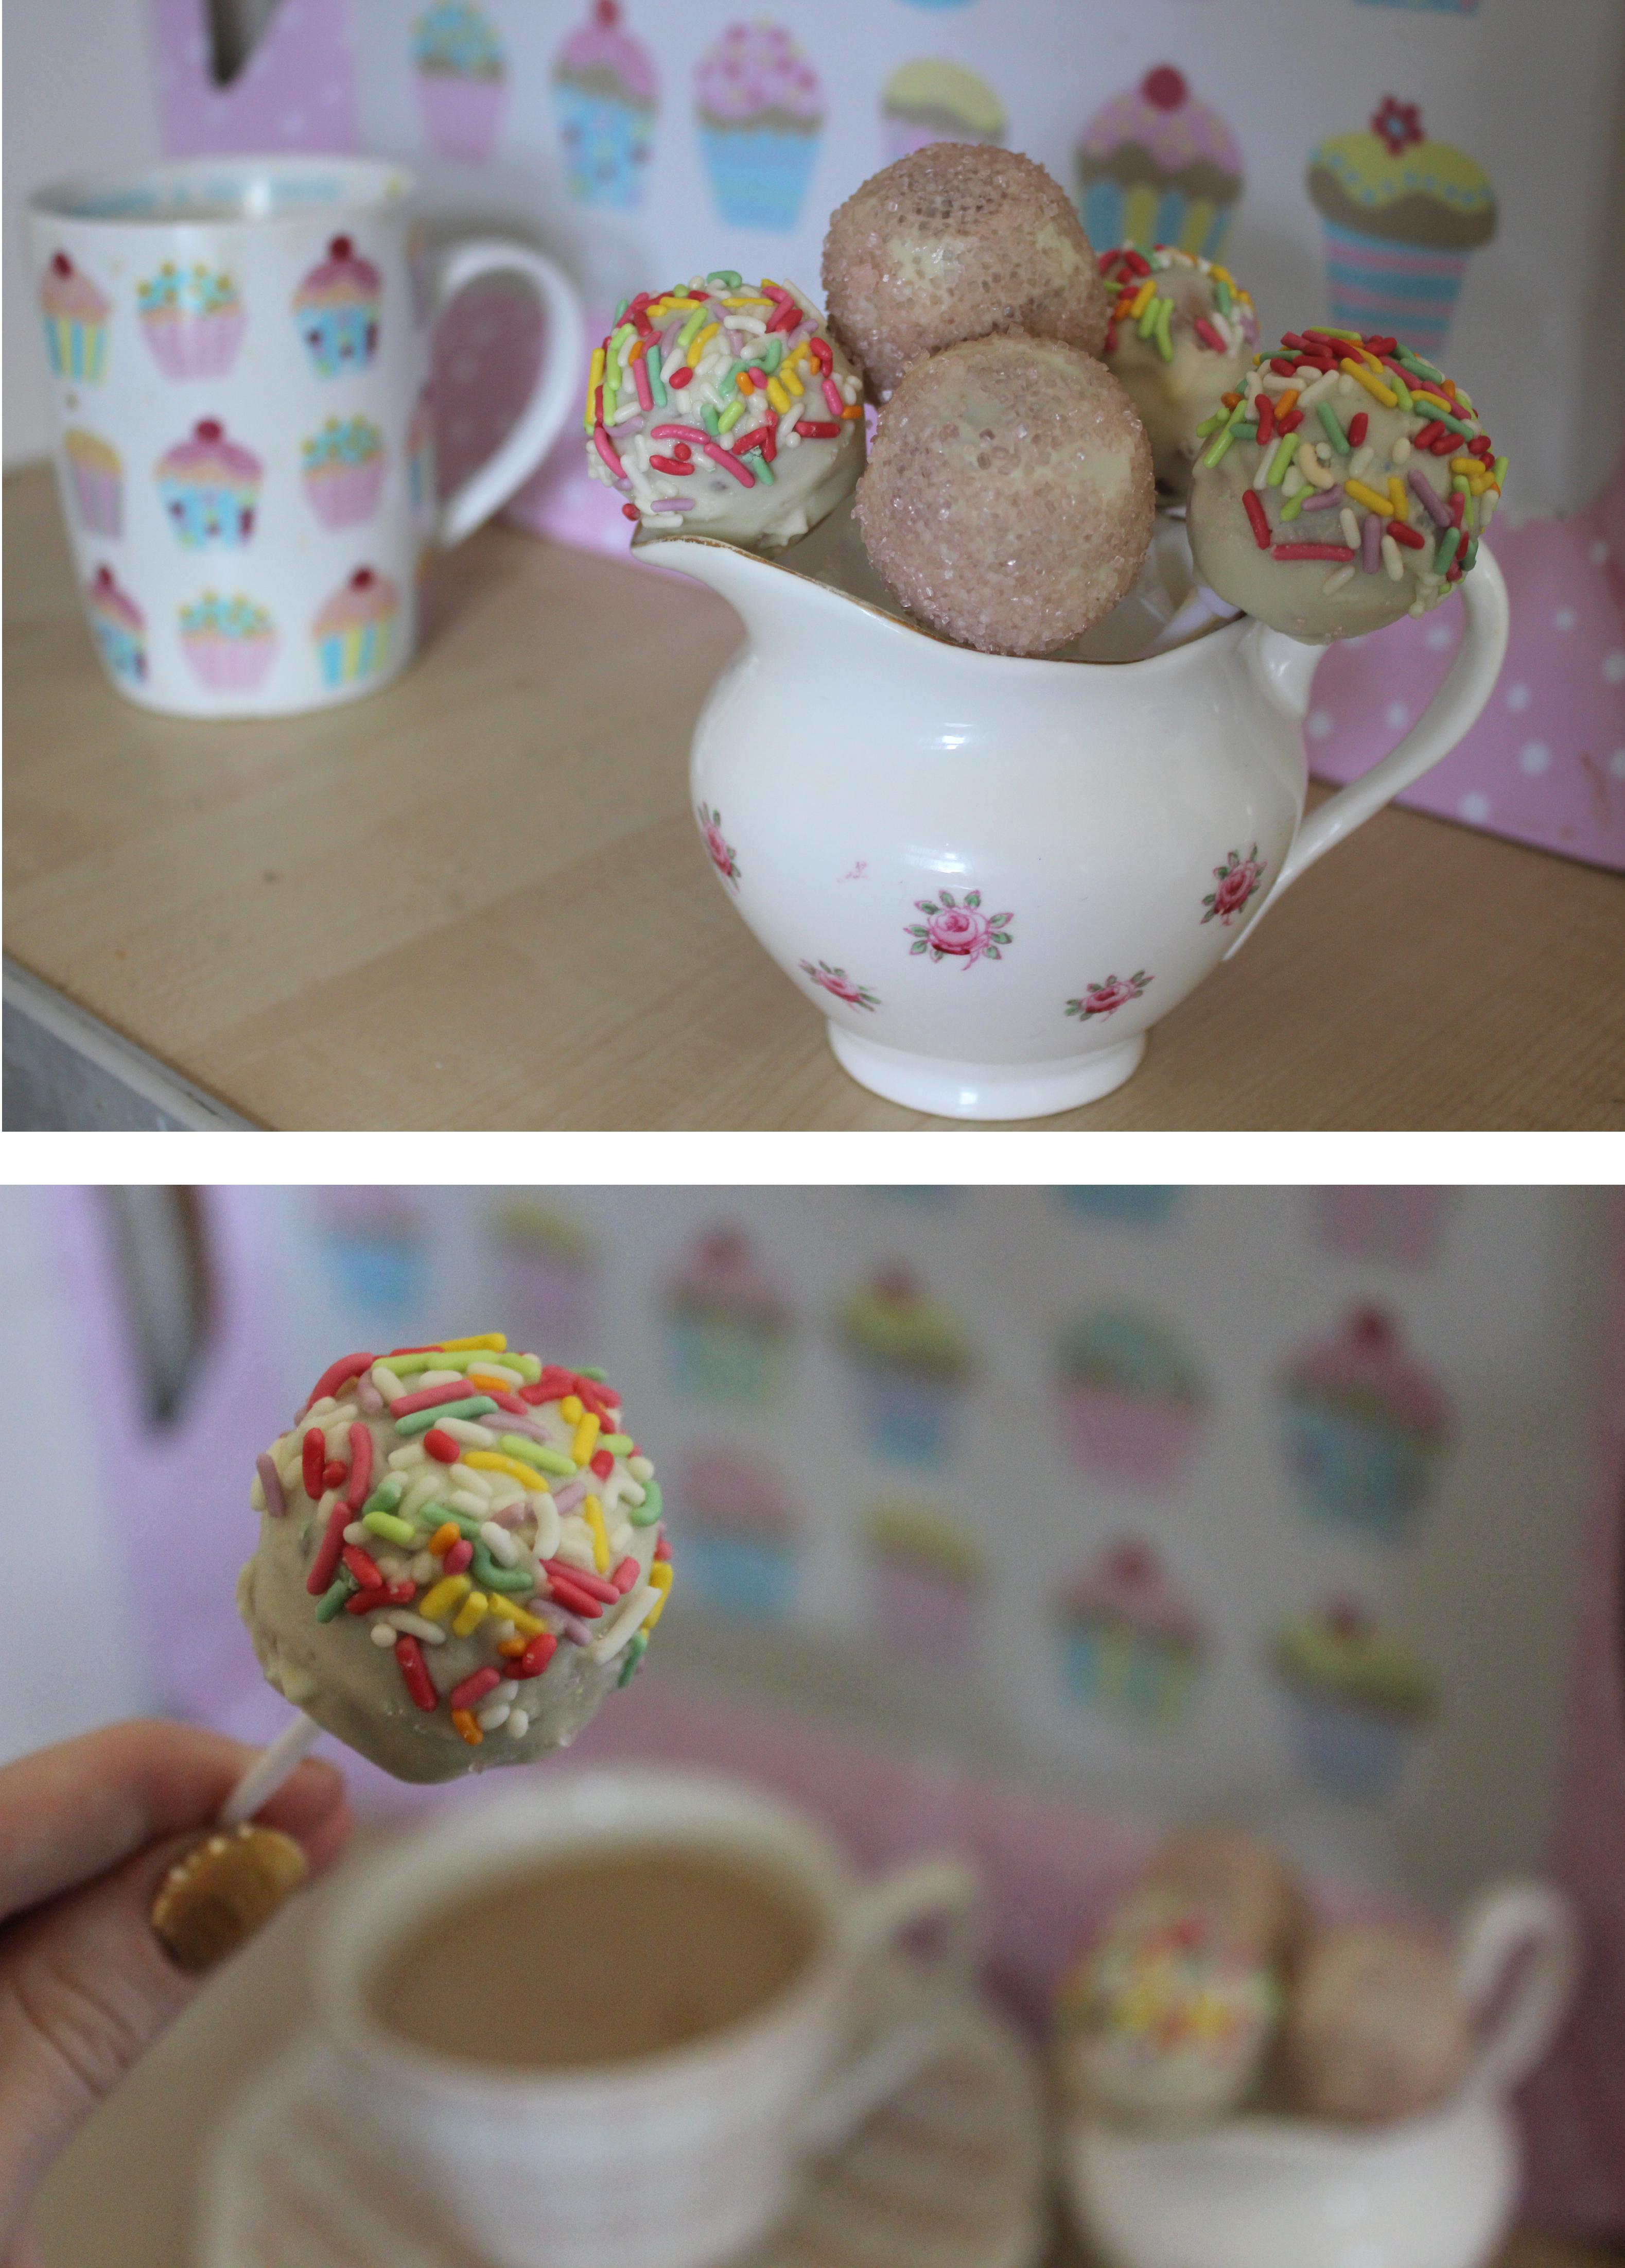 pieday friday vanilla and white chocolate cake pops using baking tray from dunelm mill sweeties